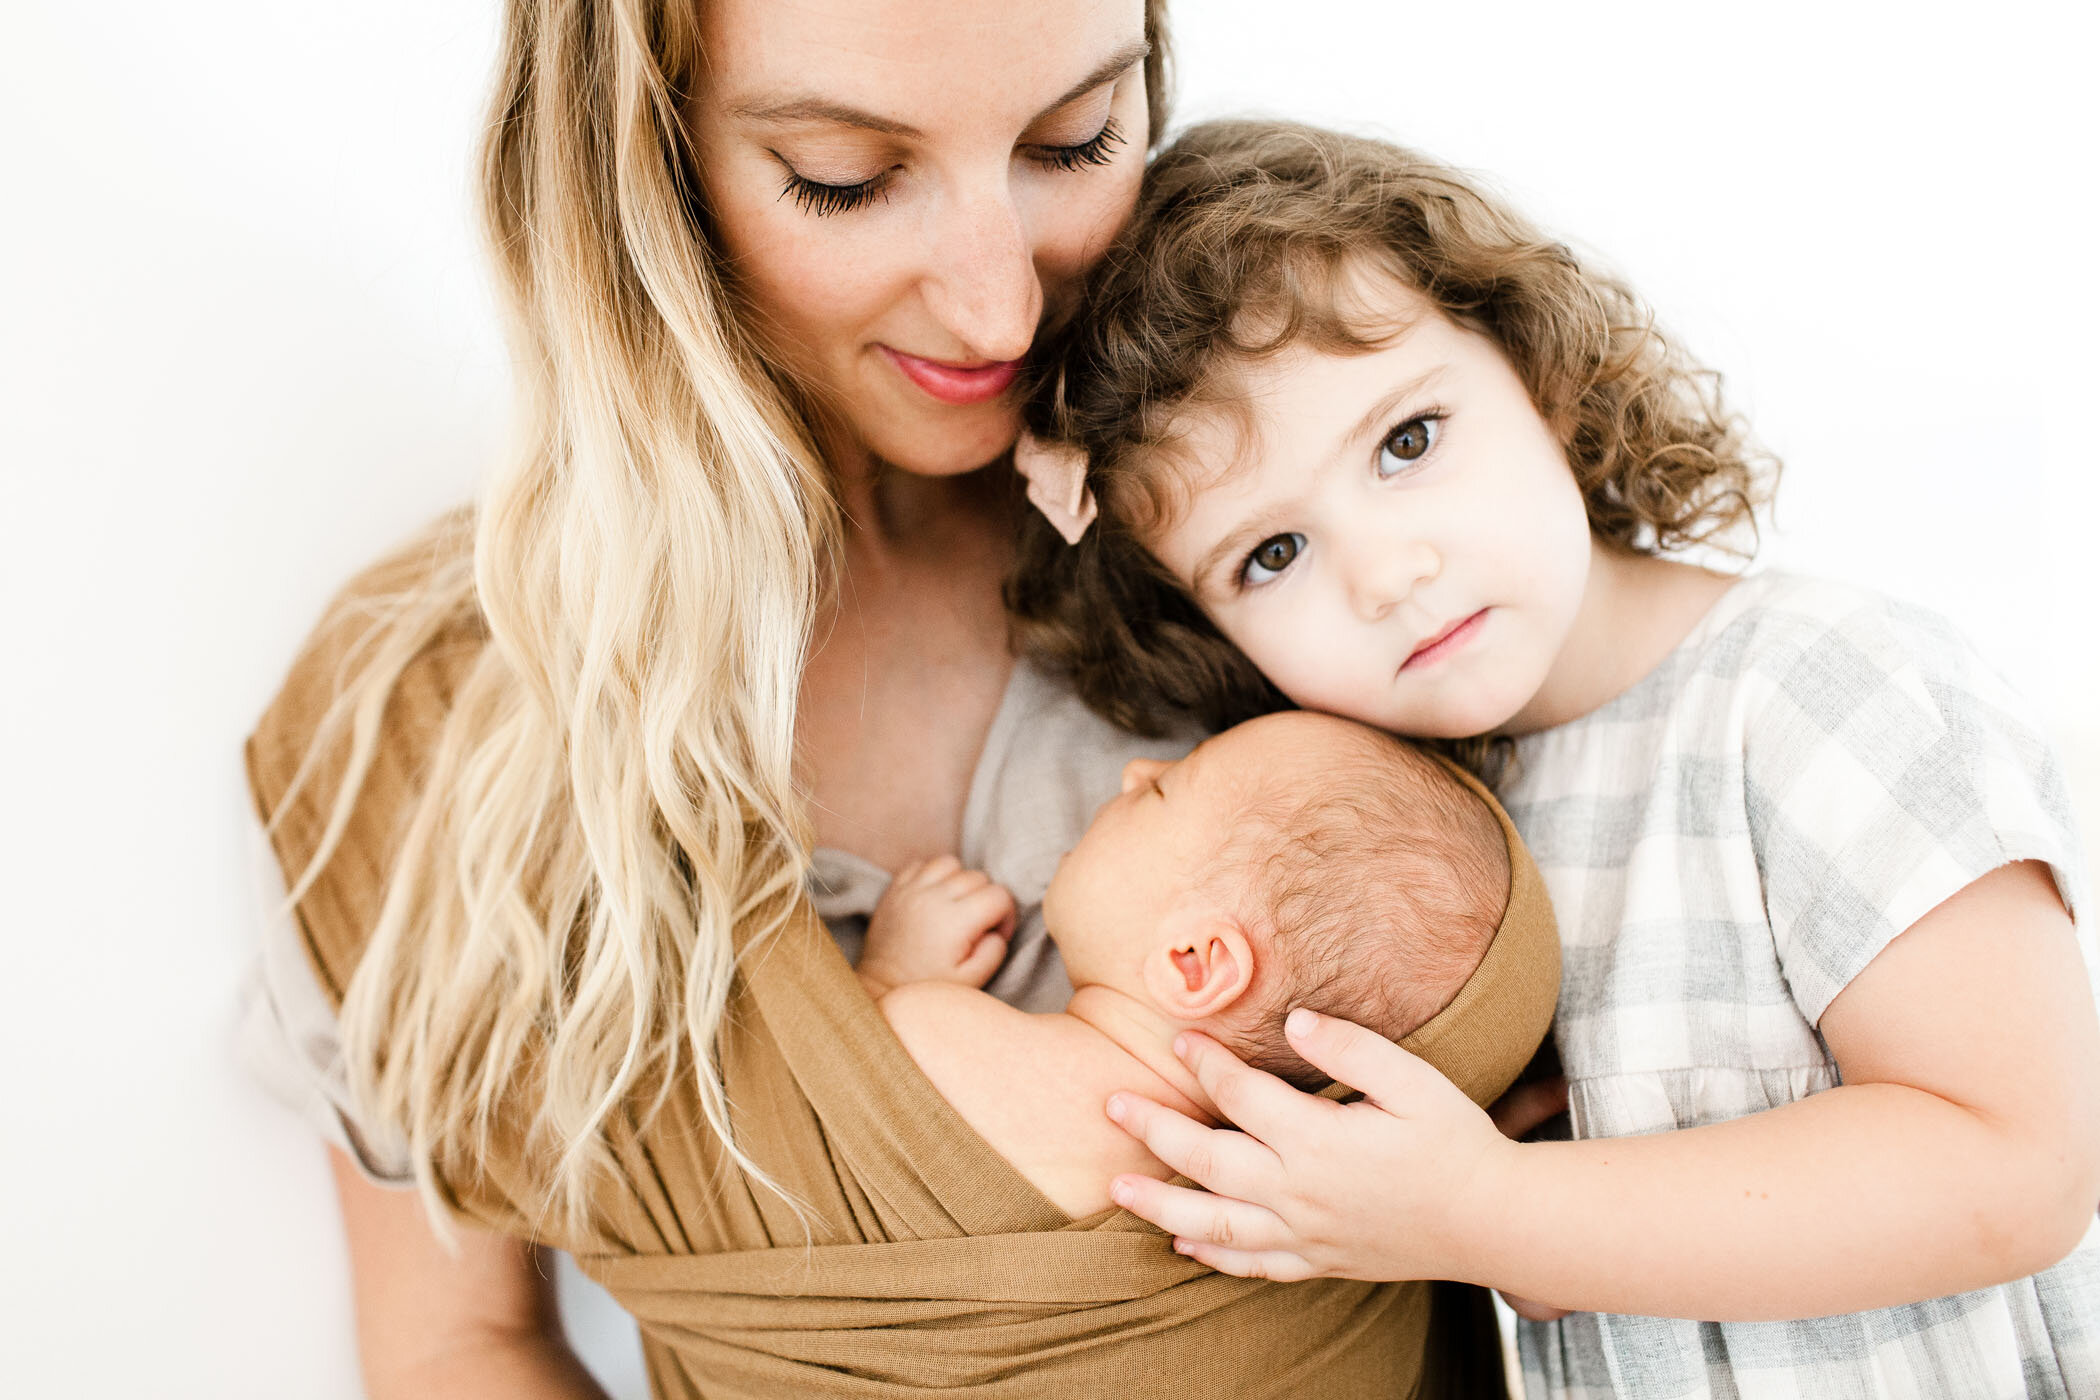 natural-light-studio-newborn-baby-session-with-sibling_fletcher-and-co-tucson_kortessis 028.jpg